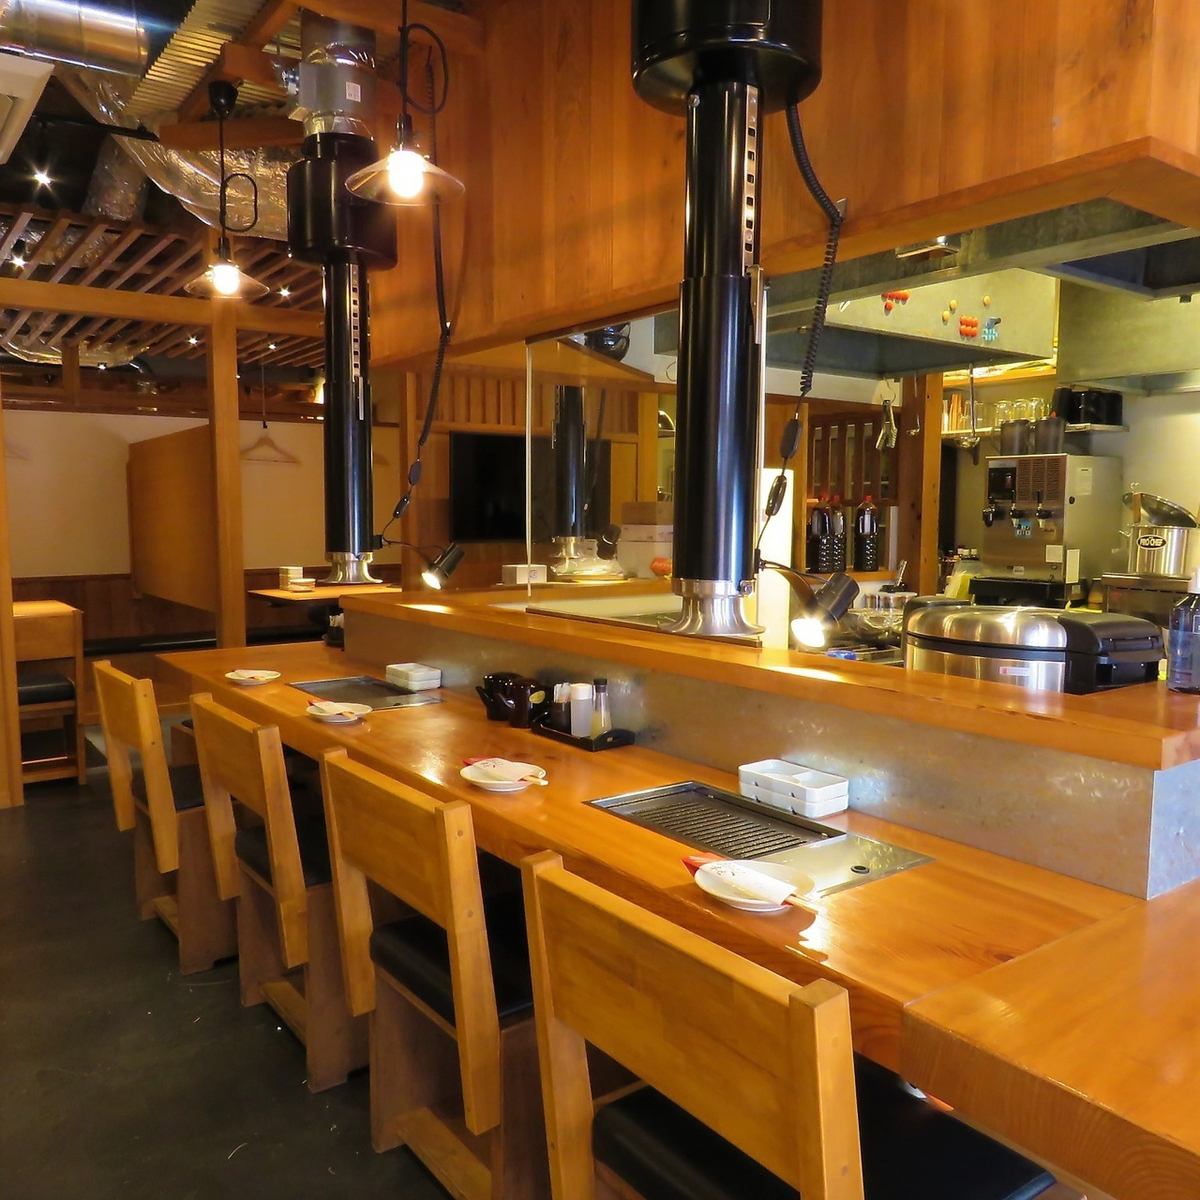 The counter, where one person can enjoy yakiniku, has a calm atmosphere!